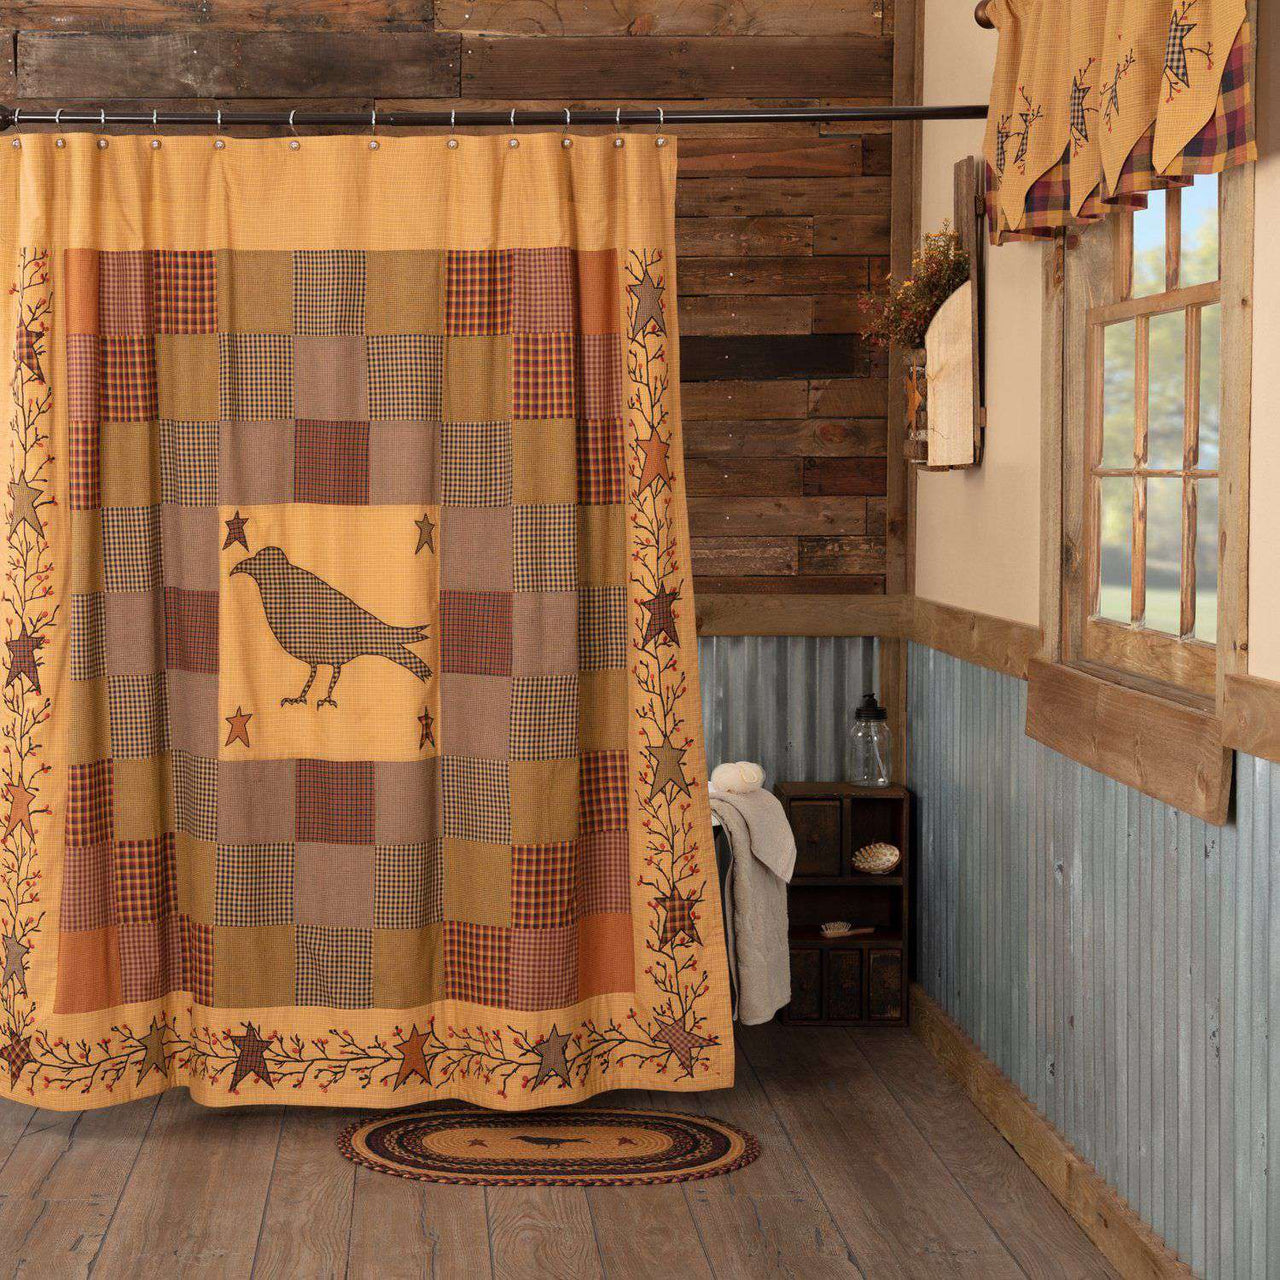 Heritage Farms Applique Crow & Star Shower Curtain 72"x72" curtain VHC Brands 